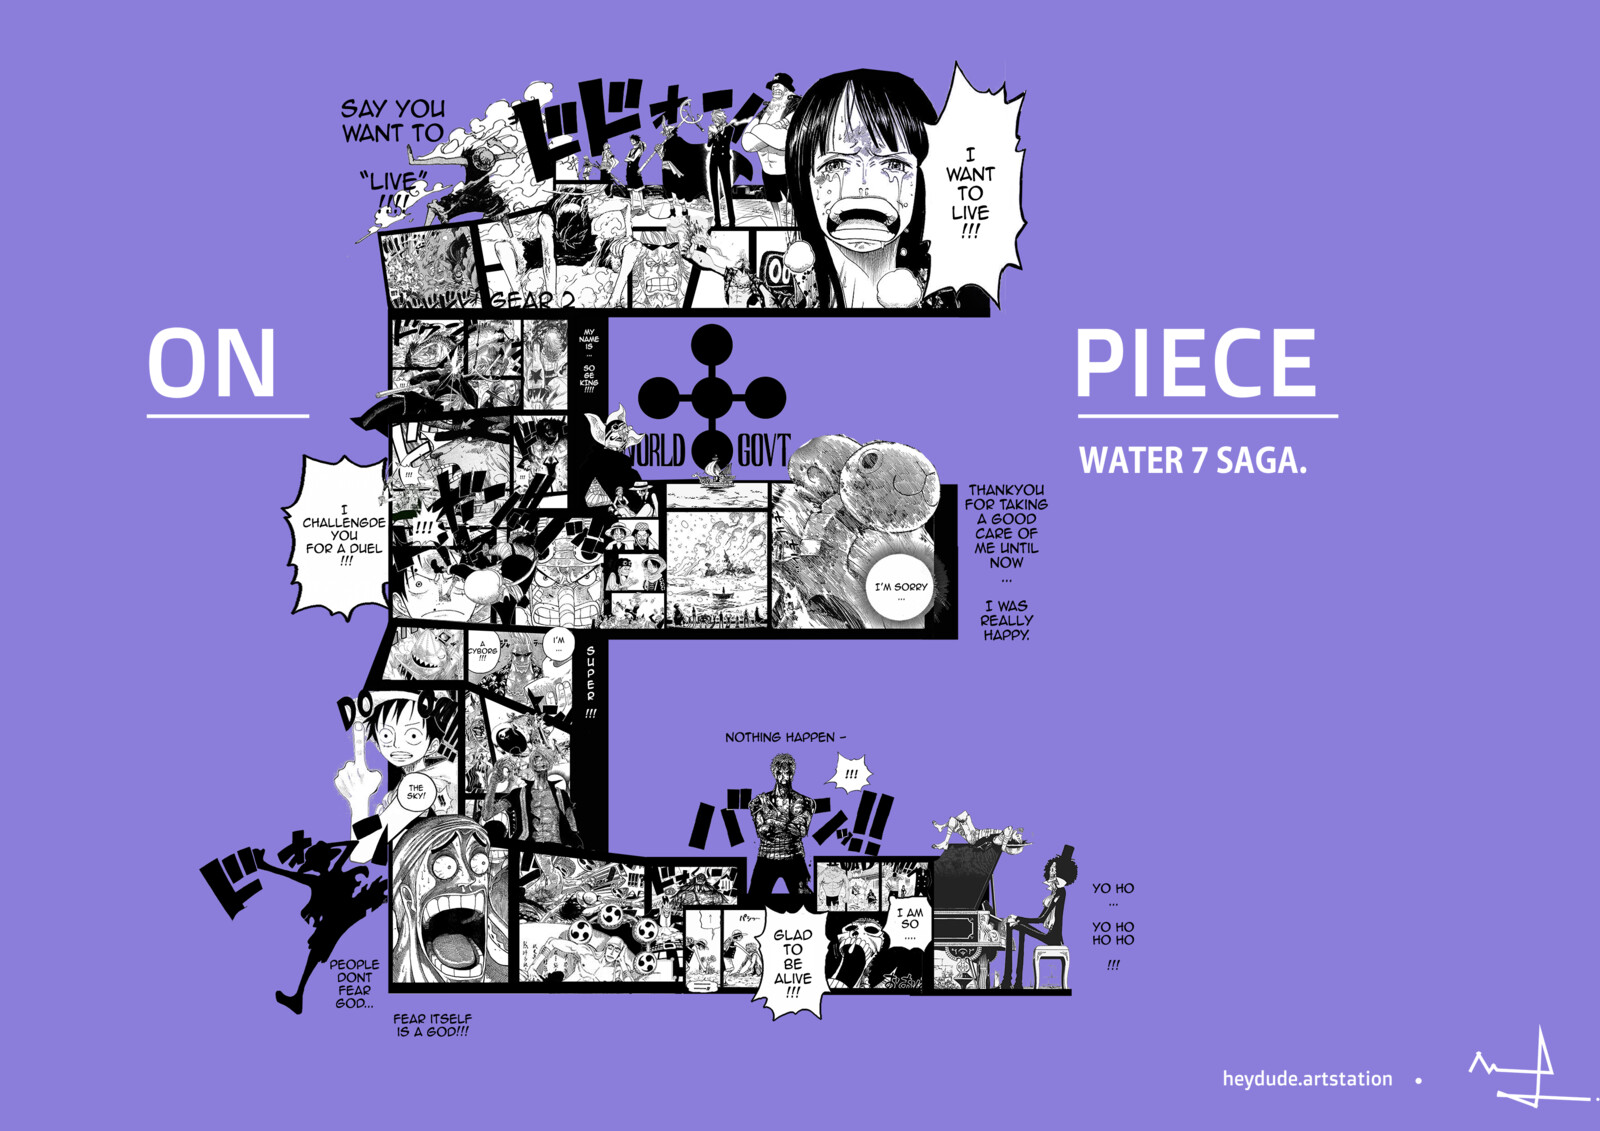 Onepiece text fill-in art #3